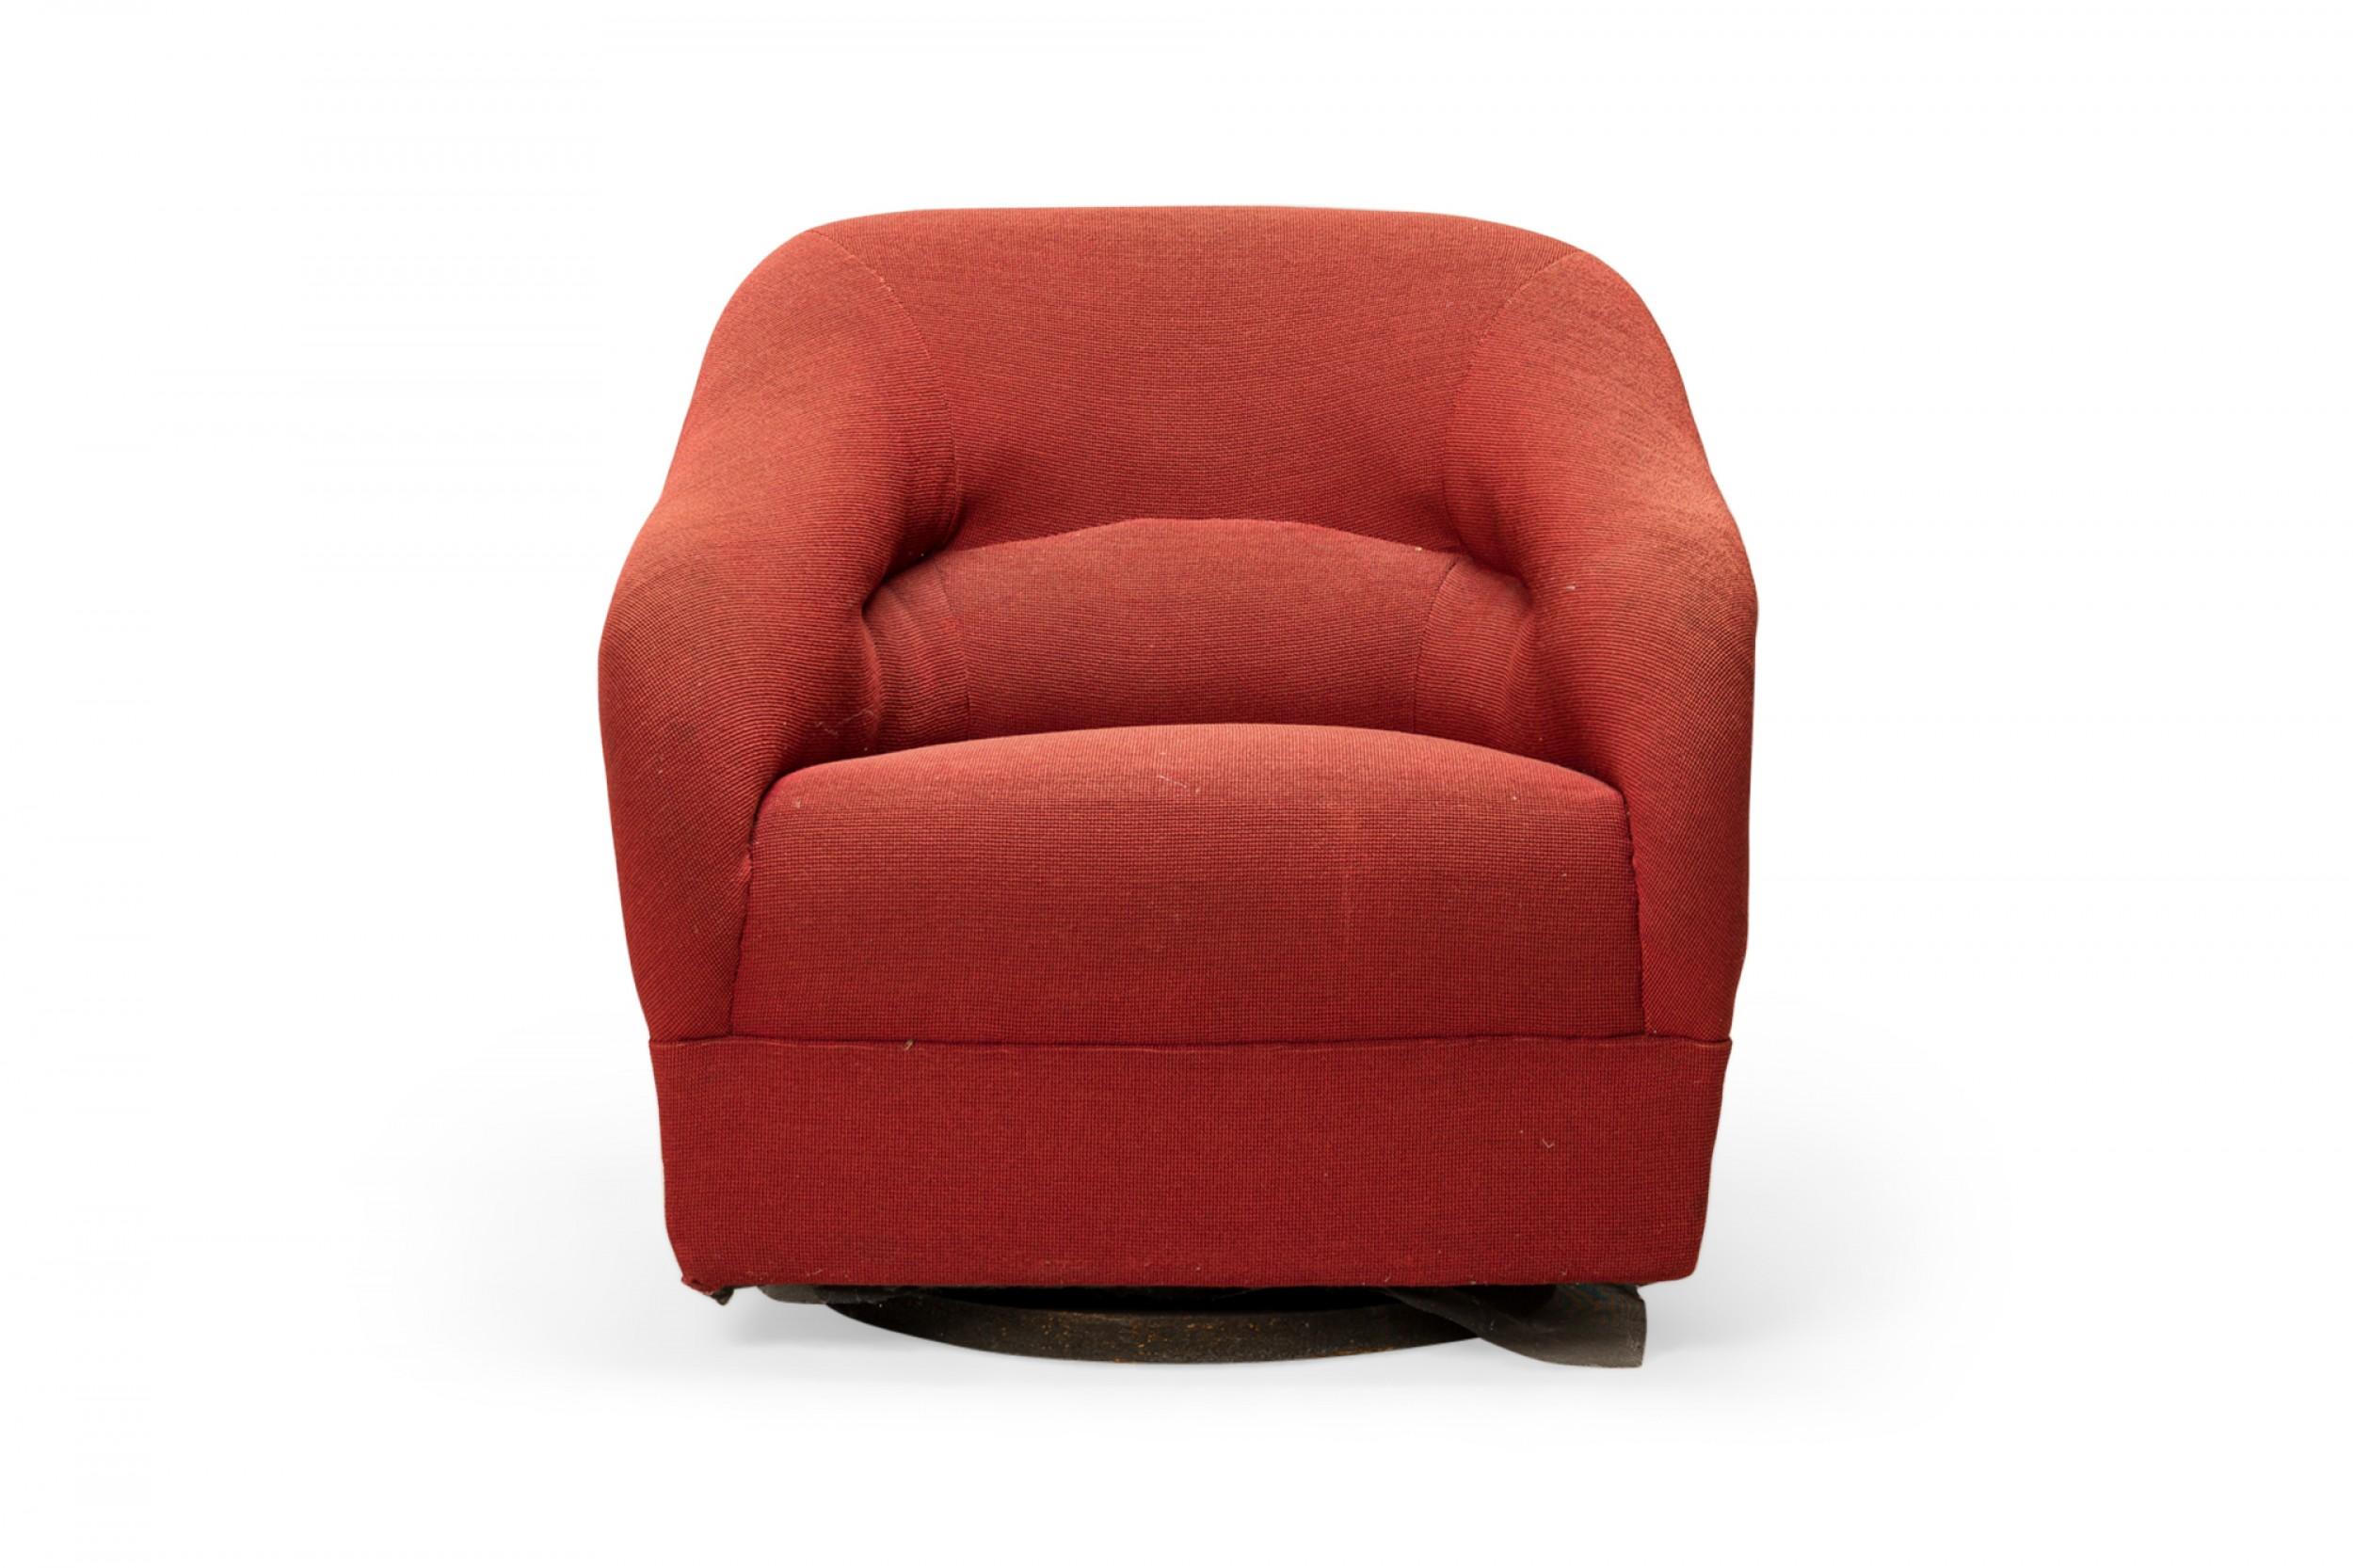 PAIR of American Mid-Century swivel lounge chairs with tub forms and plush rounded backs with a central channel, upholstered in light red fabric, resting on swivel plinth bases. (WARD BENNETT FOR BRICKEL)(PRICED AS PAIR).
 